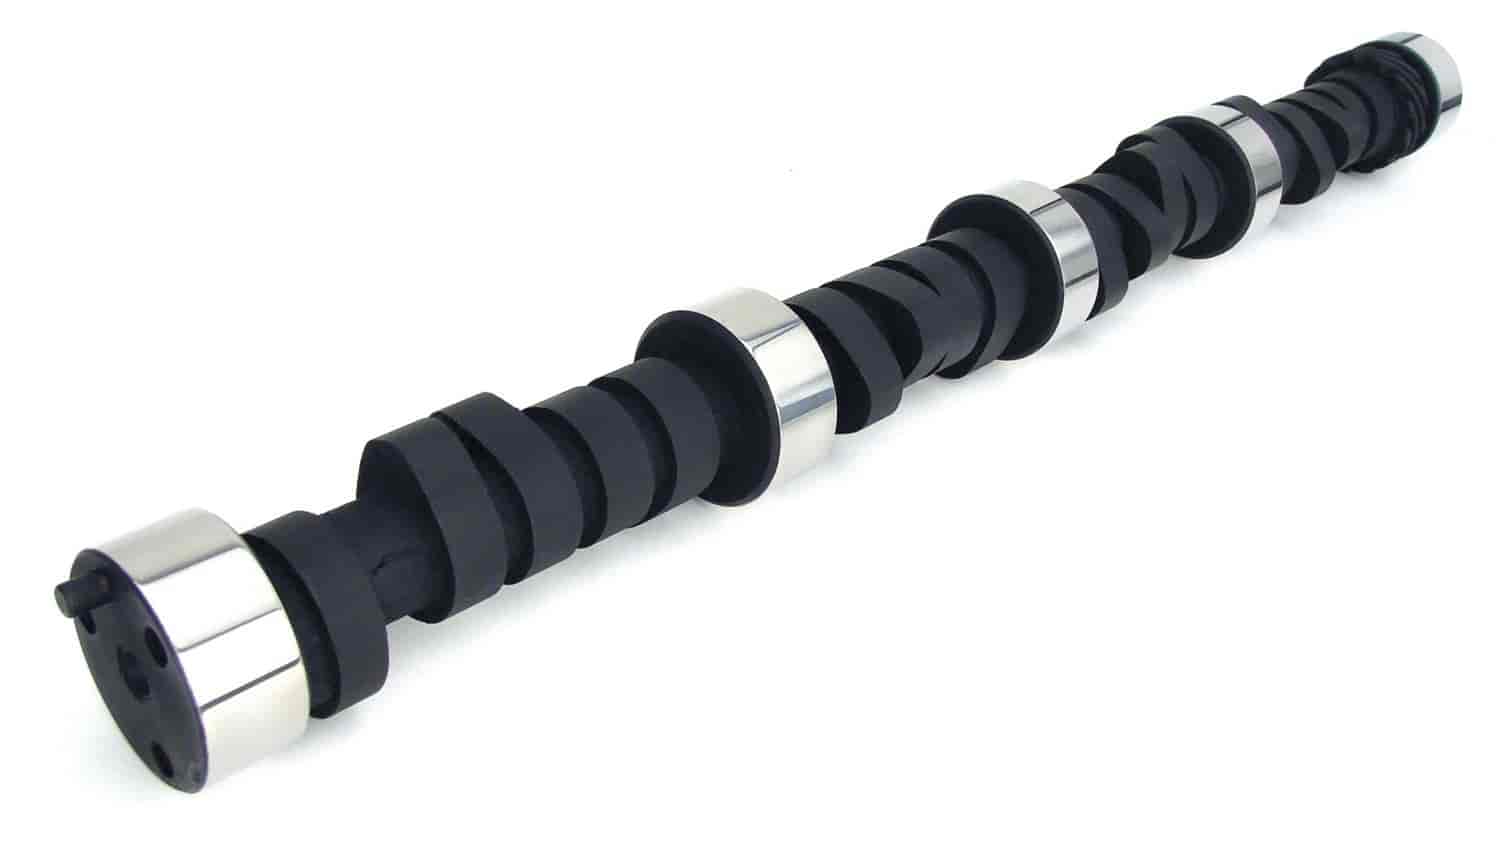 Computer Controlled Hydraulic Flat Tappet Camshaft RPM Range: 1500-5500